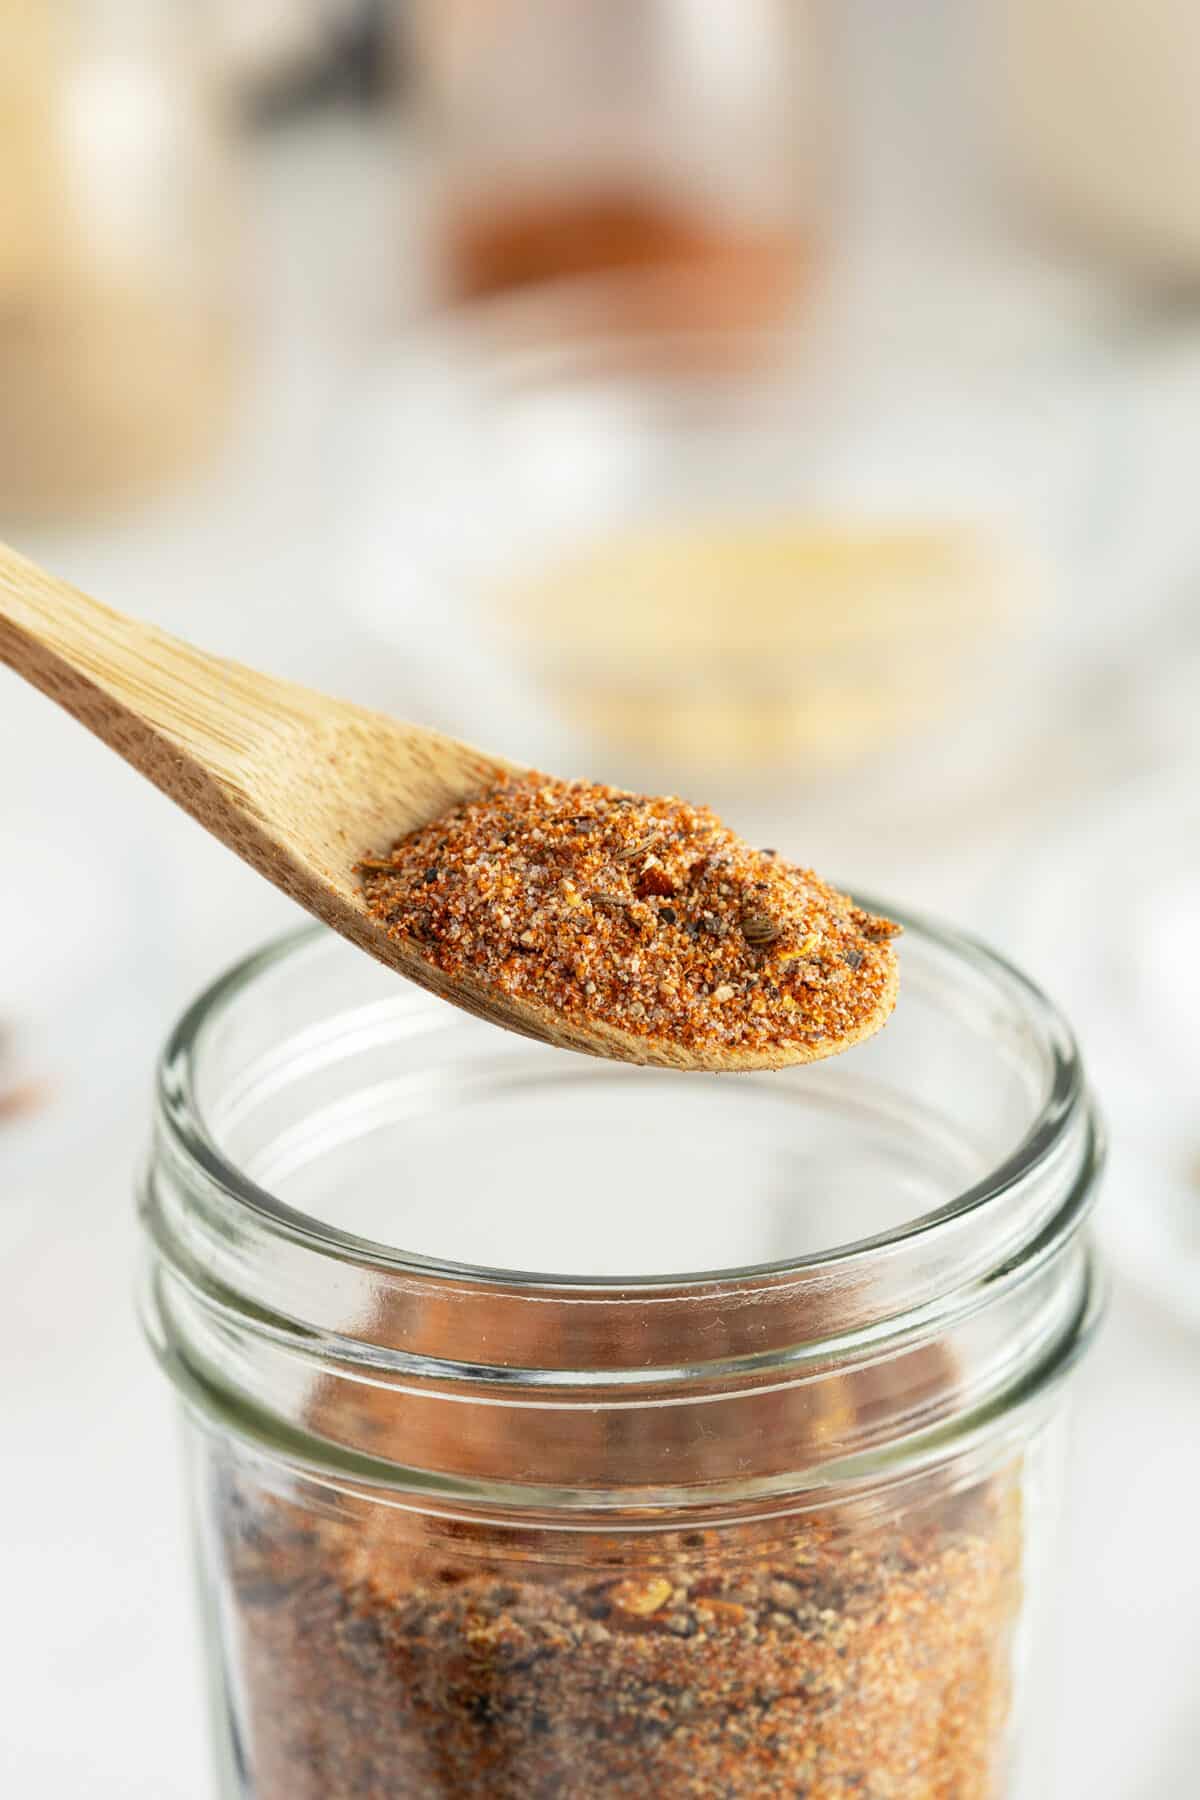 montreal steak seasoning in a jar with a wooden spoon full